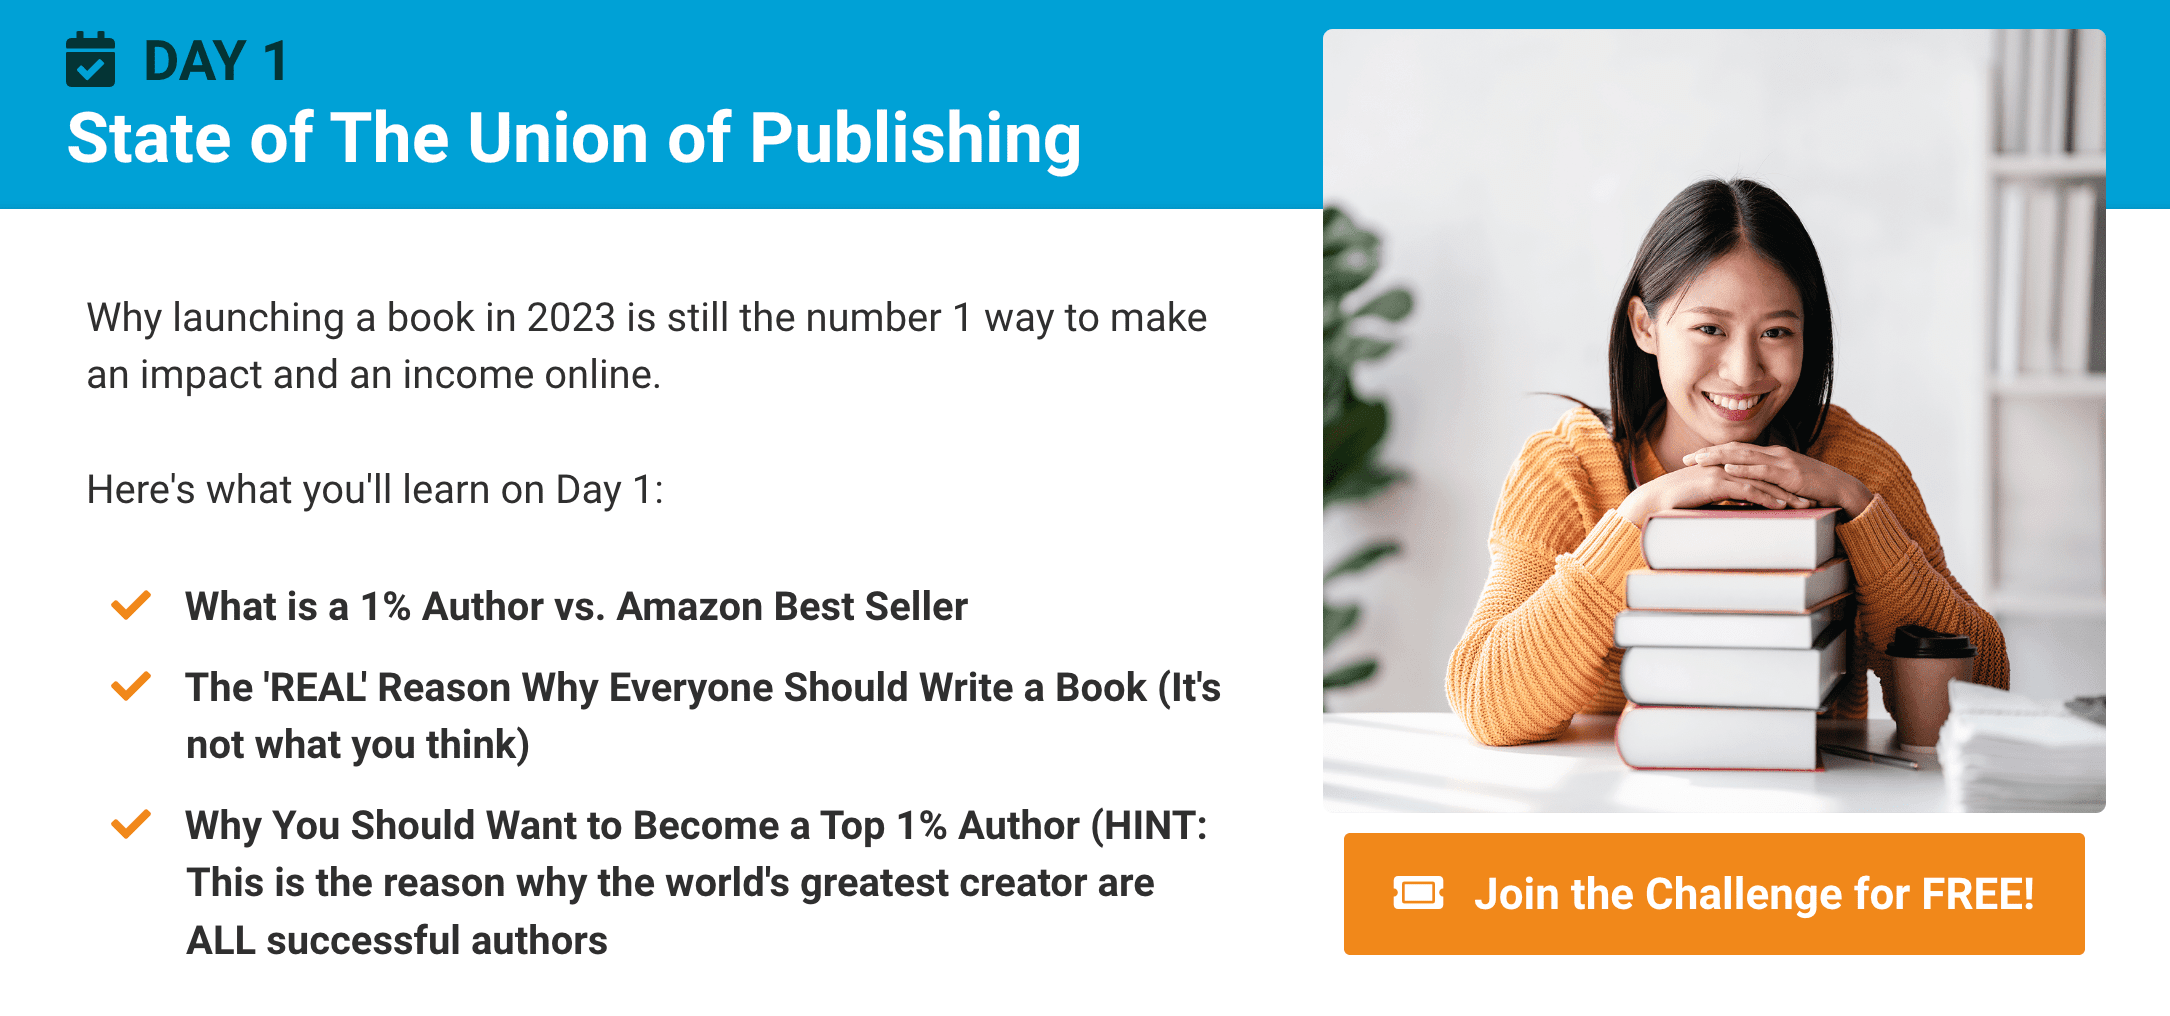 There's a NEW Self-Publishing Challenge Starting TOMORROW